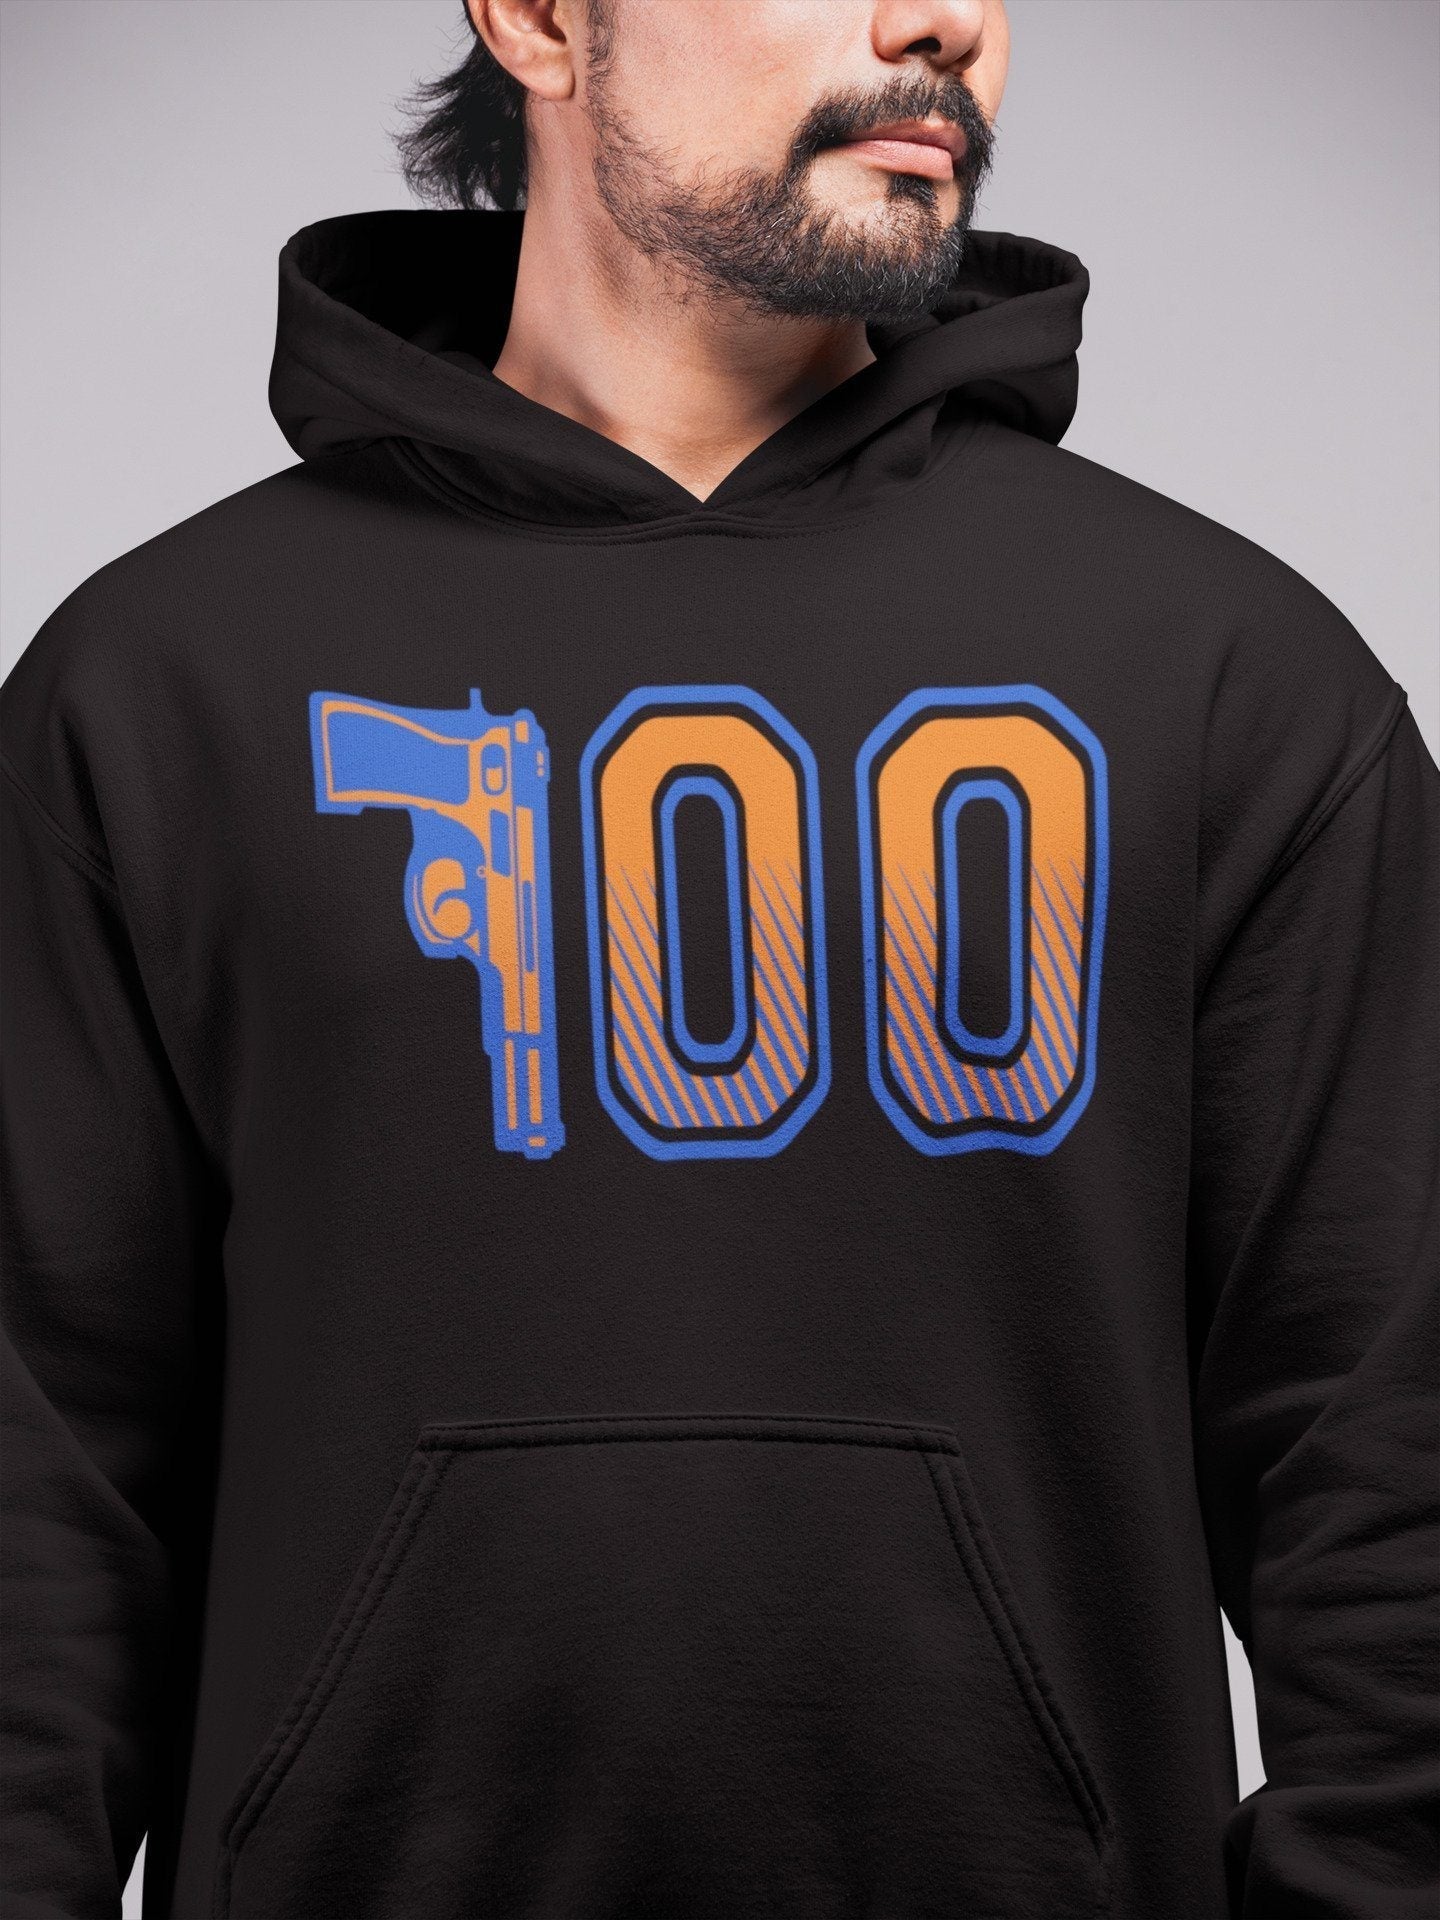 Yeezy 700 Bright Blue Shirt To Match Jordans Number 700 Sneaker Tees Yeezy 700 Bright Blue Drip Gear Zone Sneaker Matching Clothing Unisex Shirts